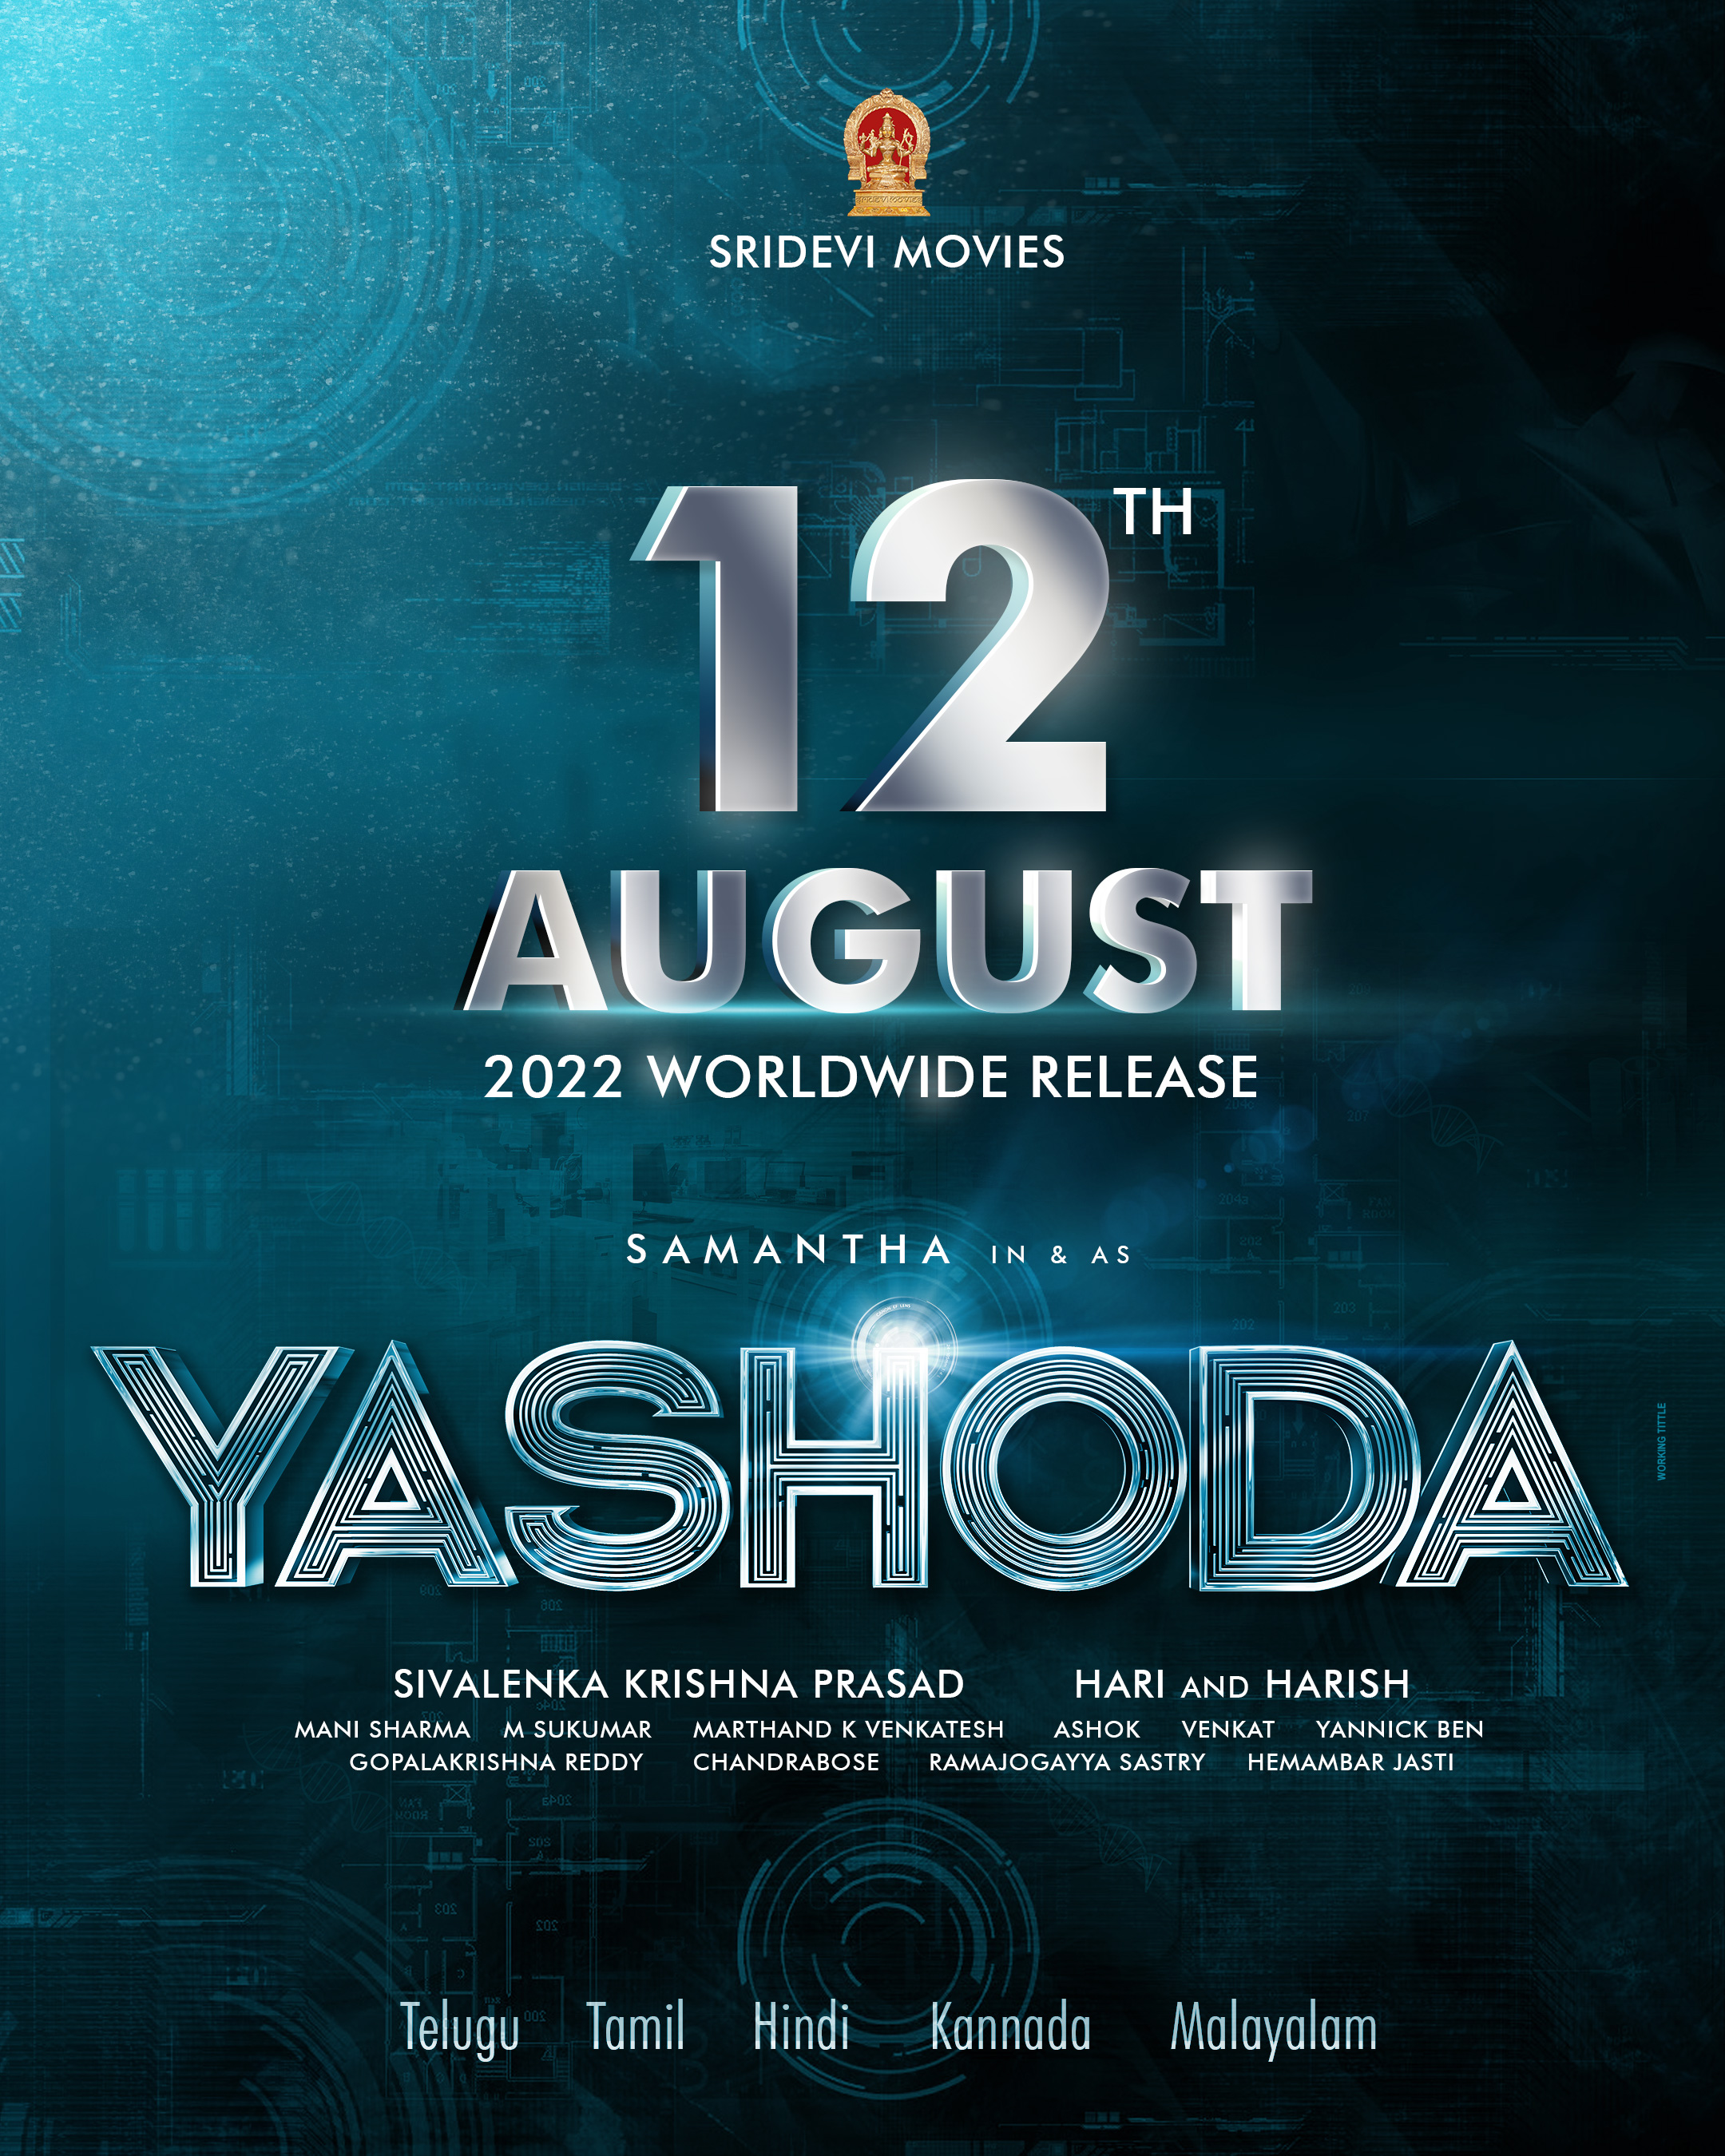 Samantha's next under Sridevi Movies, 'Yashoda' to release on August 12th